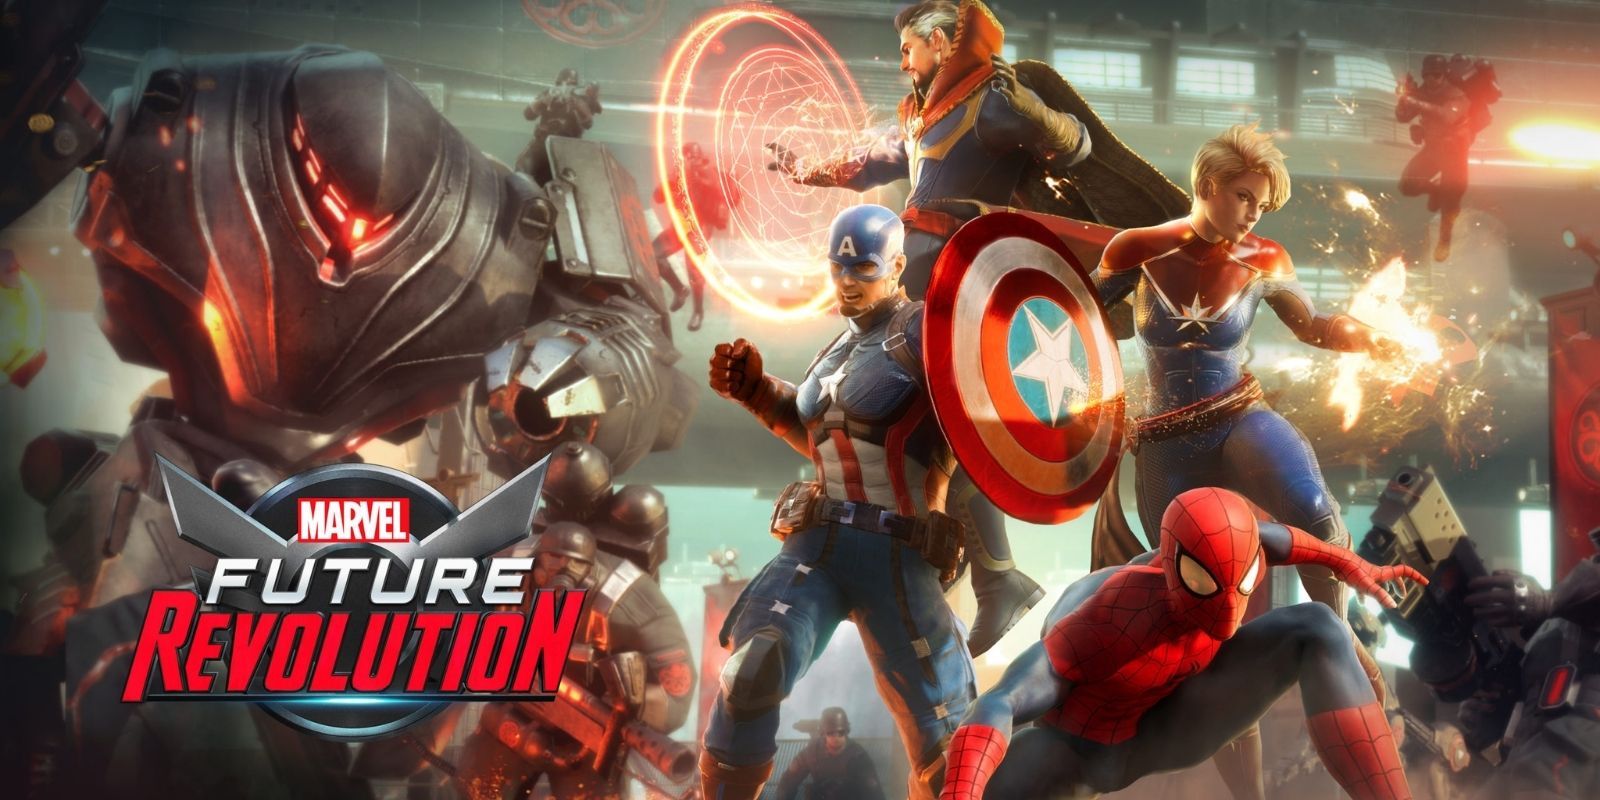 Spider-Man, Captain Marvel, Doctor Strange and Captain America fighting back against an army of Ultron bots in Marvel Future Revolution